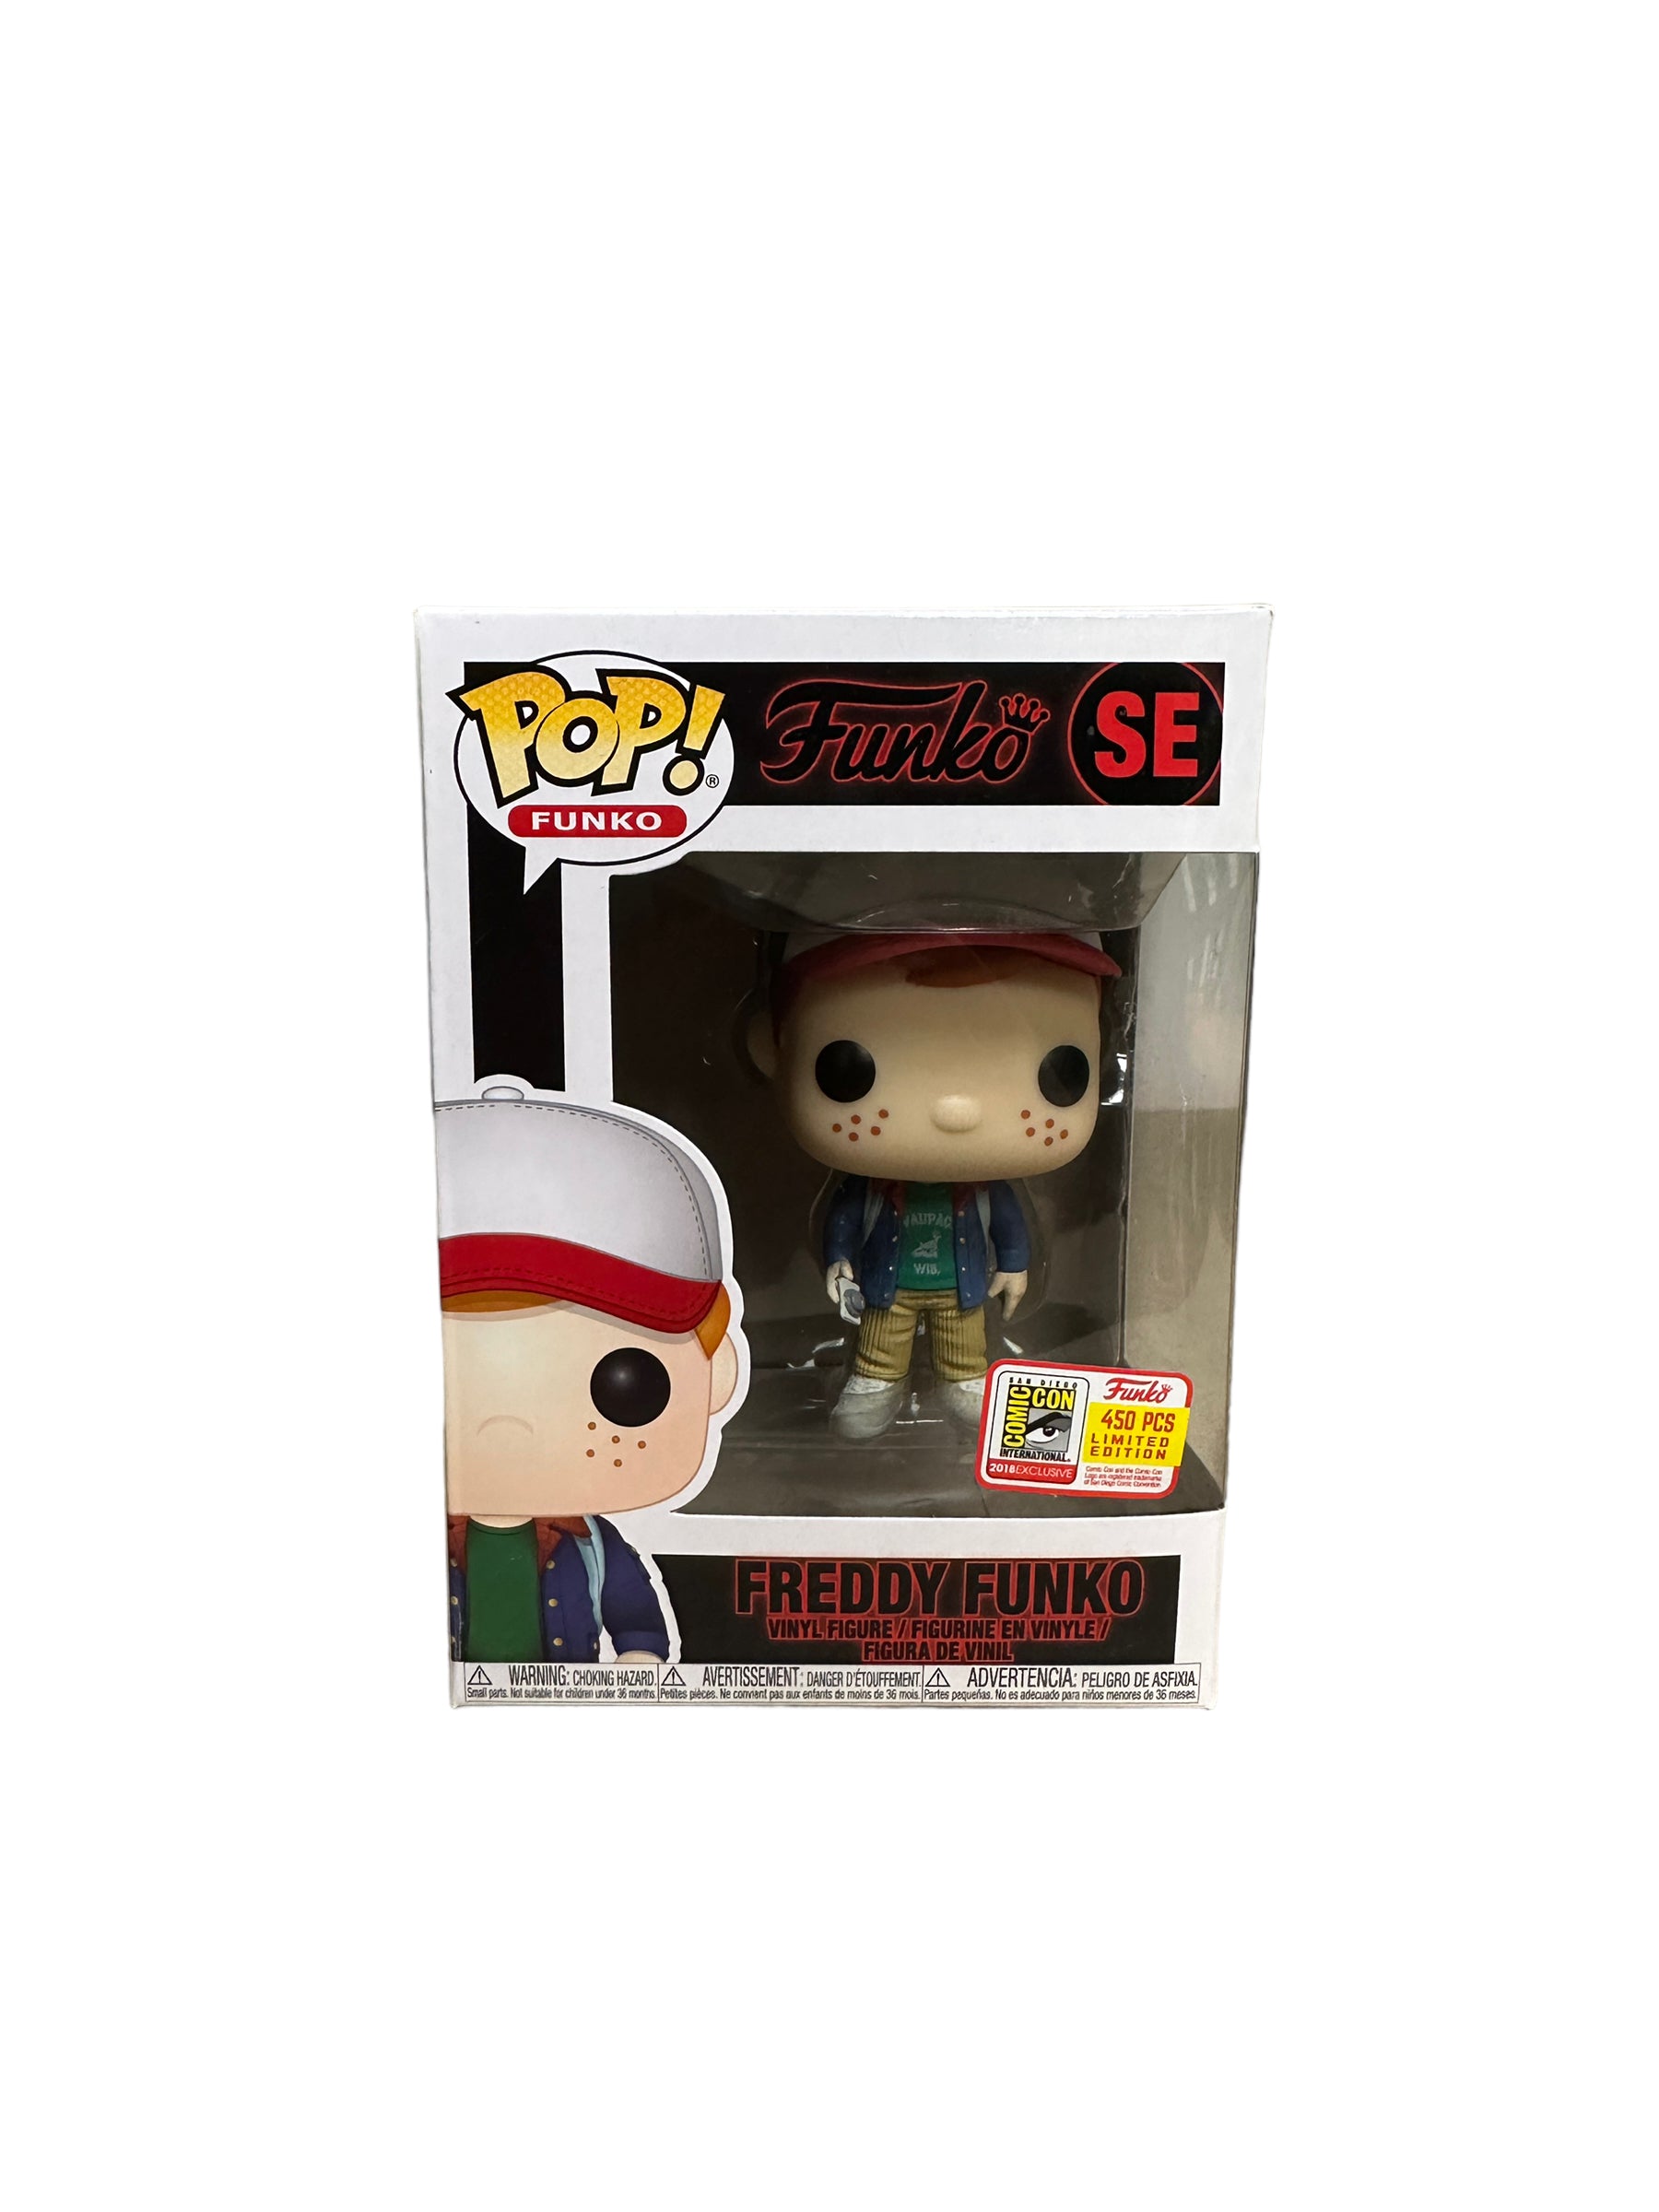 Freddy Funko as Dustin Funko Pop! - Stranger Things - SDCC 2018 Exclusive LE450 Pcs - Condition 8.75/10